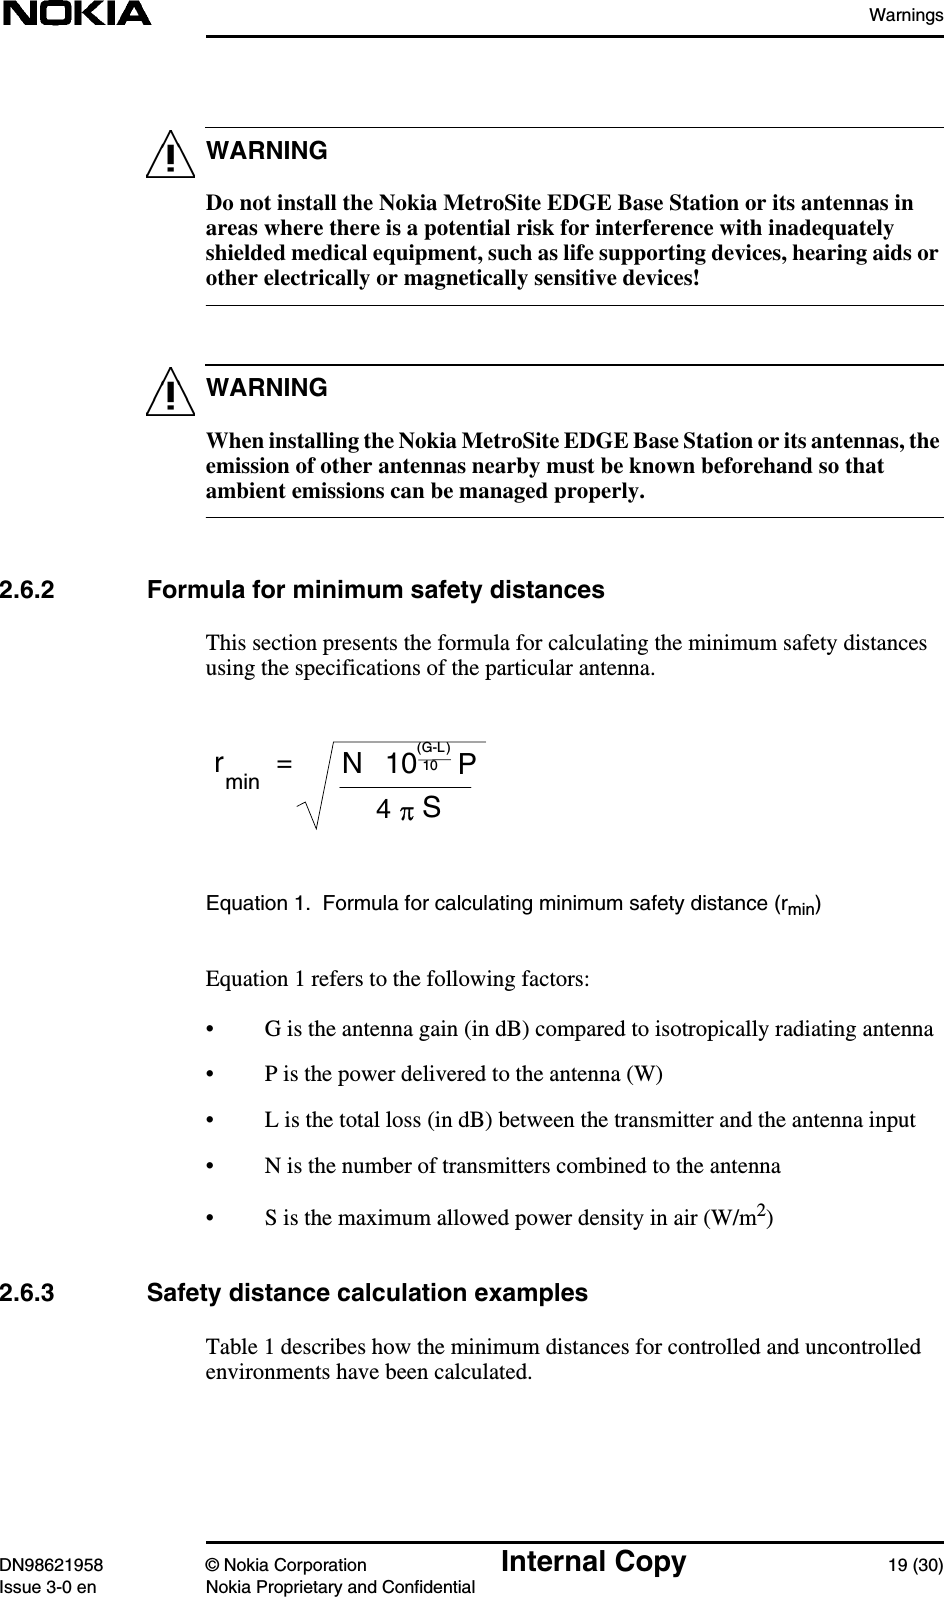 WarningsDN98621958 © Nokia Corporation Internal Copy 19 (30)Issue 3-0 en Nokia Proprietary and ConfidentialWARNINGWARNINGDo not install the Nokia MetroSite EDGE Base Station or its antennas inareas where there is a potential risk for interference with inadequatelyshielded medical equipment, such as life supporting devices, hearing aids orother electrically or magnetically sensitive devices!When installing the Nokia MetroSite EDGE Base Station or its antennas, theemission of other antennas nearby must be known beforehand so thatambient emissions can be managed properly.2.6.2 Formula for minimum safety distancesThis section presents the formula for calculating the minimum safety distancesusing the specifications of the particular antenna.Equation 1. Formula for calculating minimum safety distance (rmin)Equation 1 refers to the following factors:• G is the antenna gain (in dB) compared to isotropically radiating antenna• P is the power delivered to the antenna (W)• L is the total loss (in dB) between the transmitter and the antenna input• N is the number of transmitters combined to the antenna• S is the maximum allowed power density in air (W/m2)2.6.3 Safety distance calculation examplesTable 1 describes how the minimum distances for controlled and uncontrolledenvironments have been calculated.rmin=N10 P(G-L)10S4